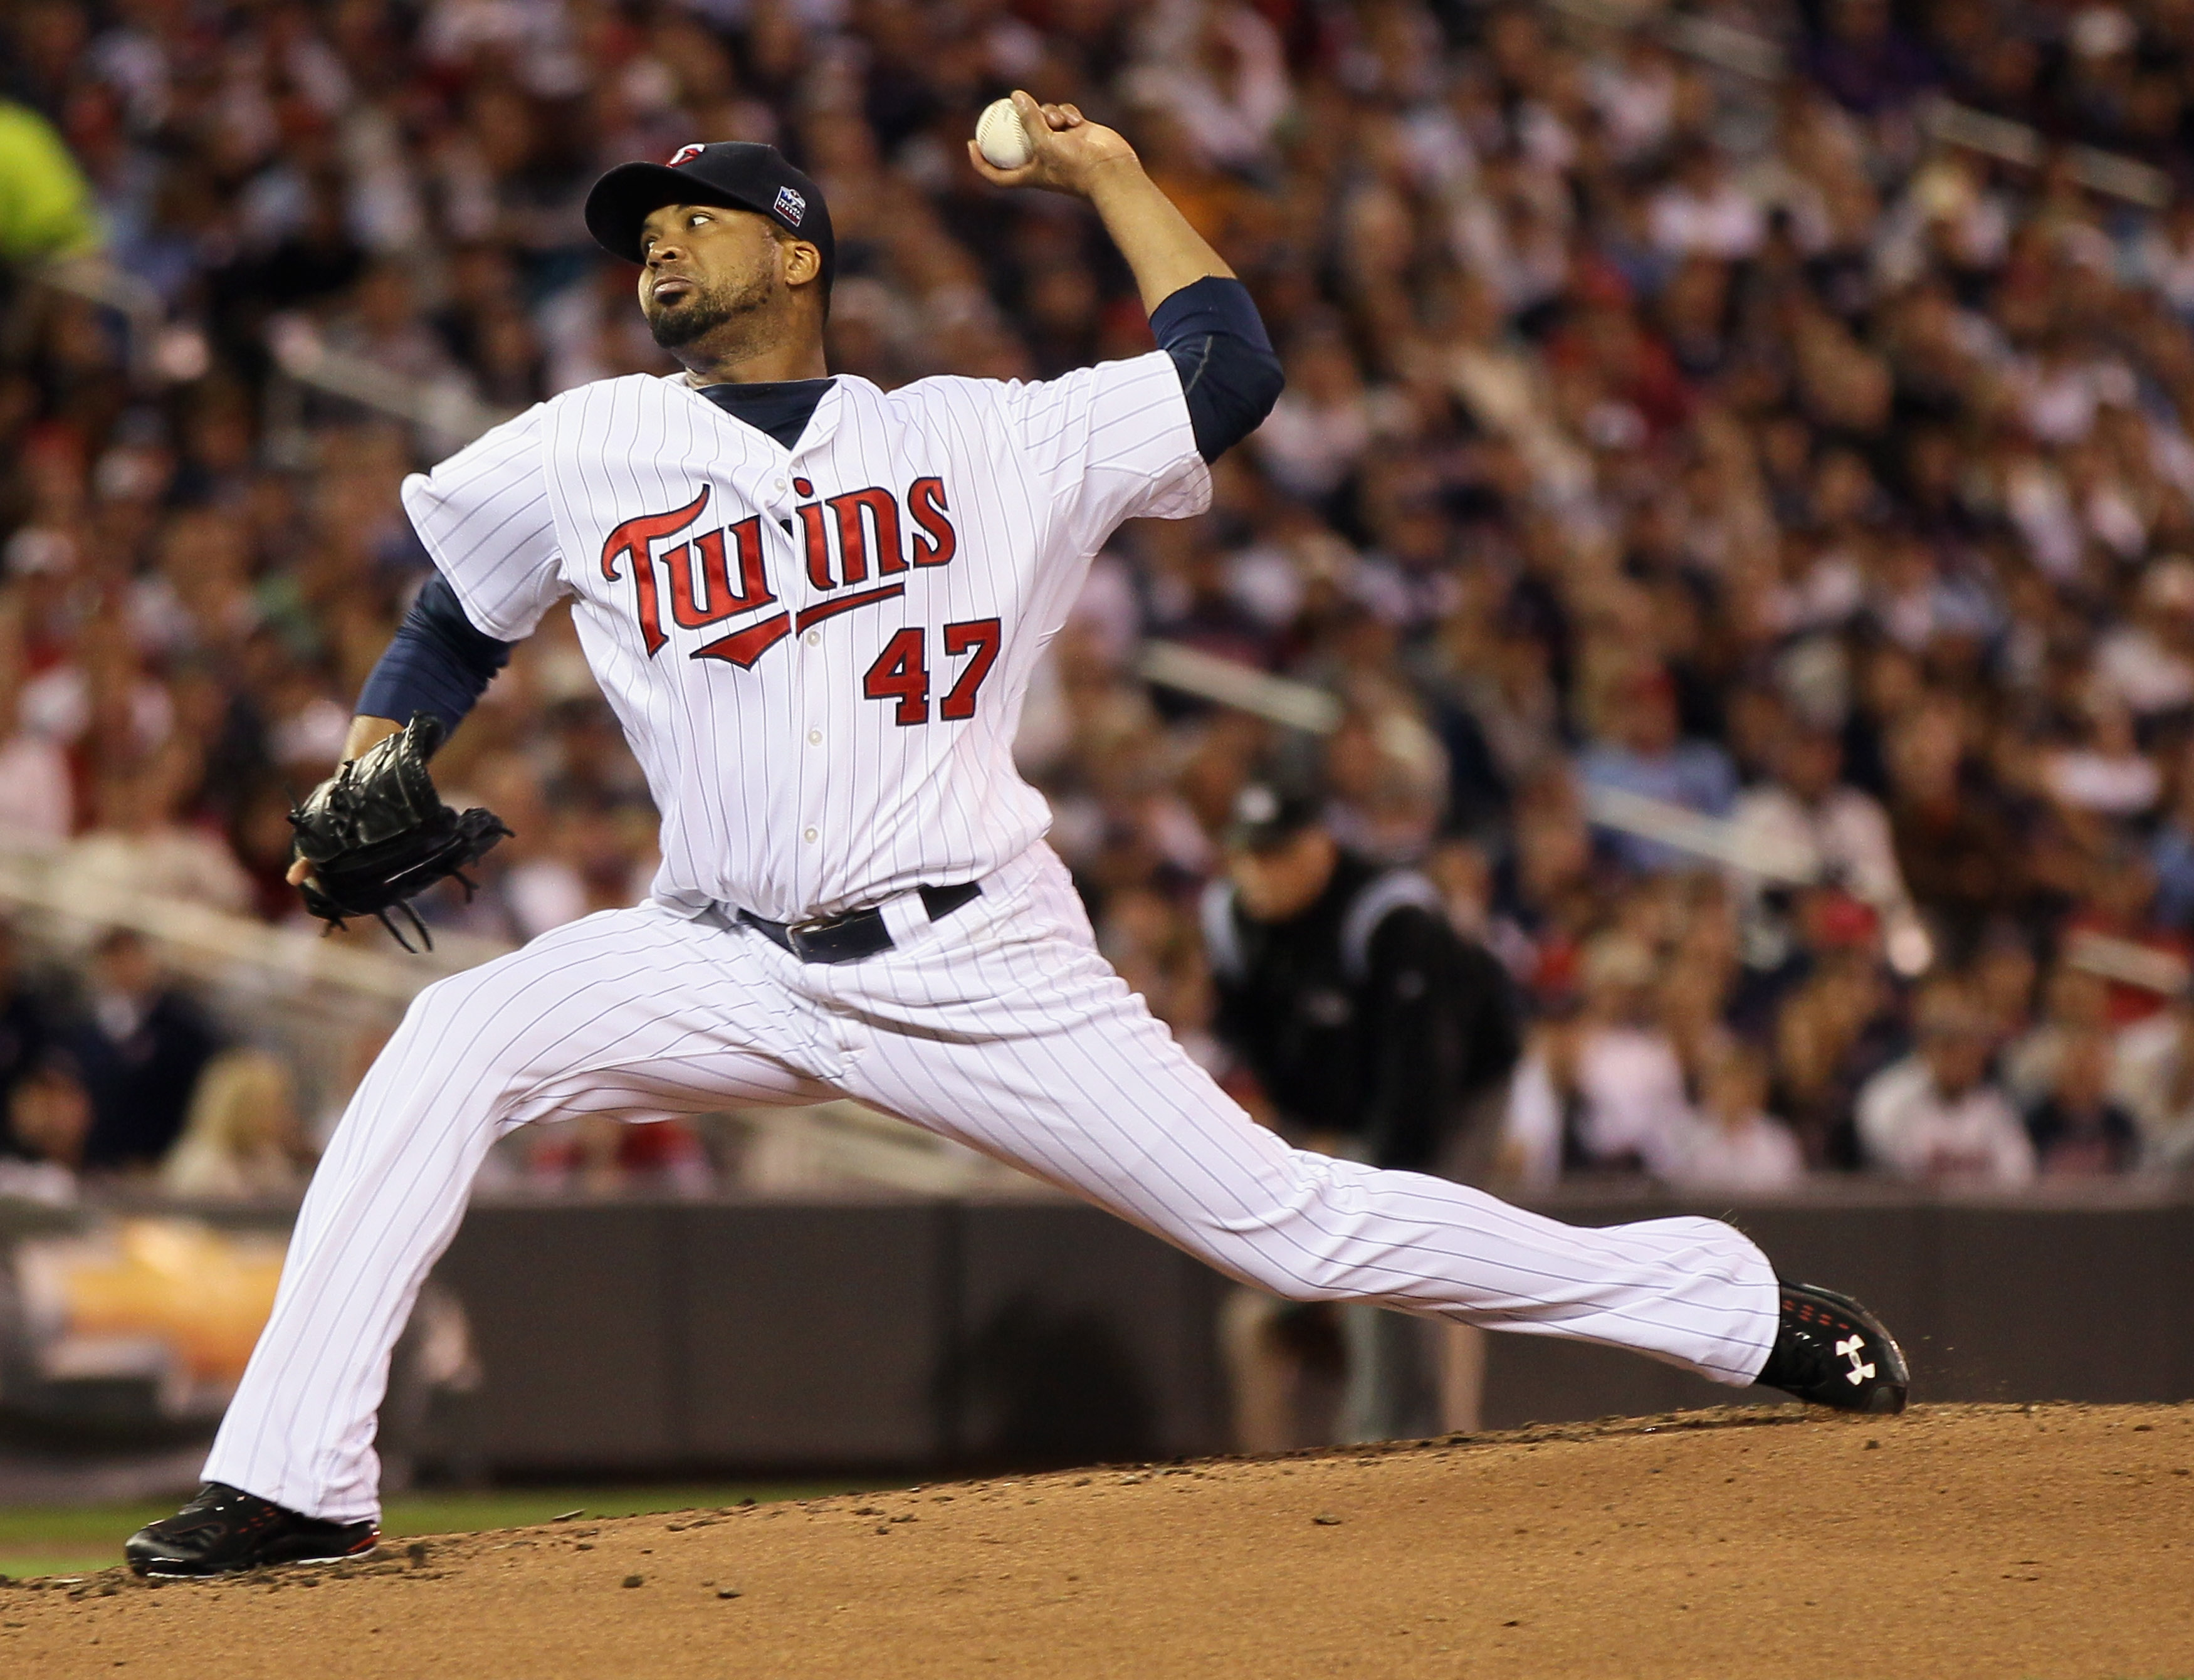 Lefties usually fair well in the Bronx, but could Liriano?